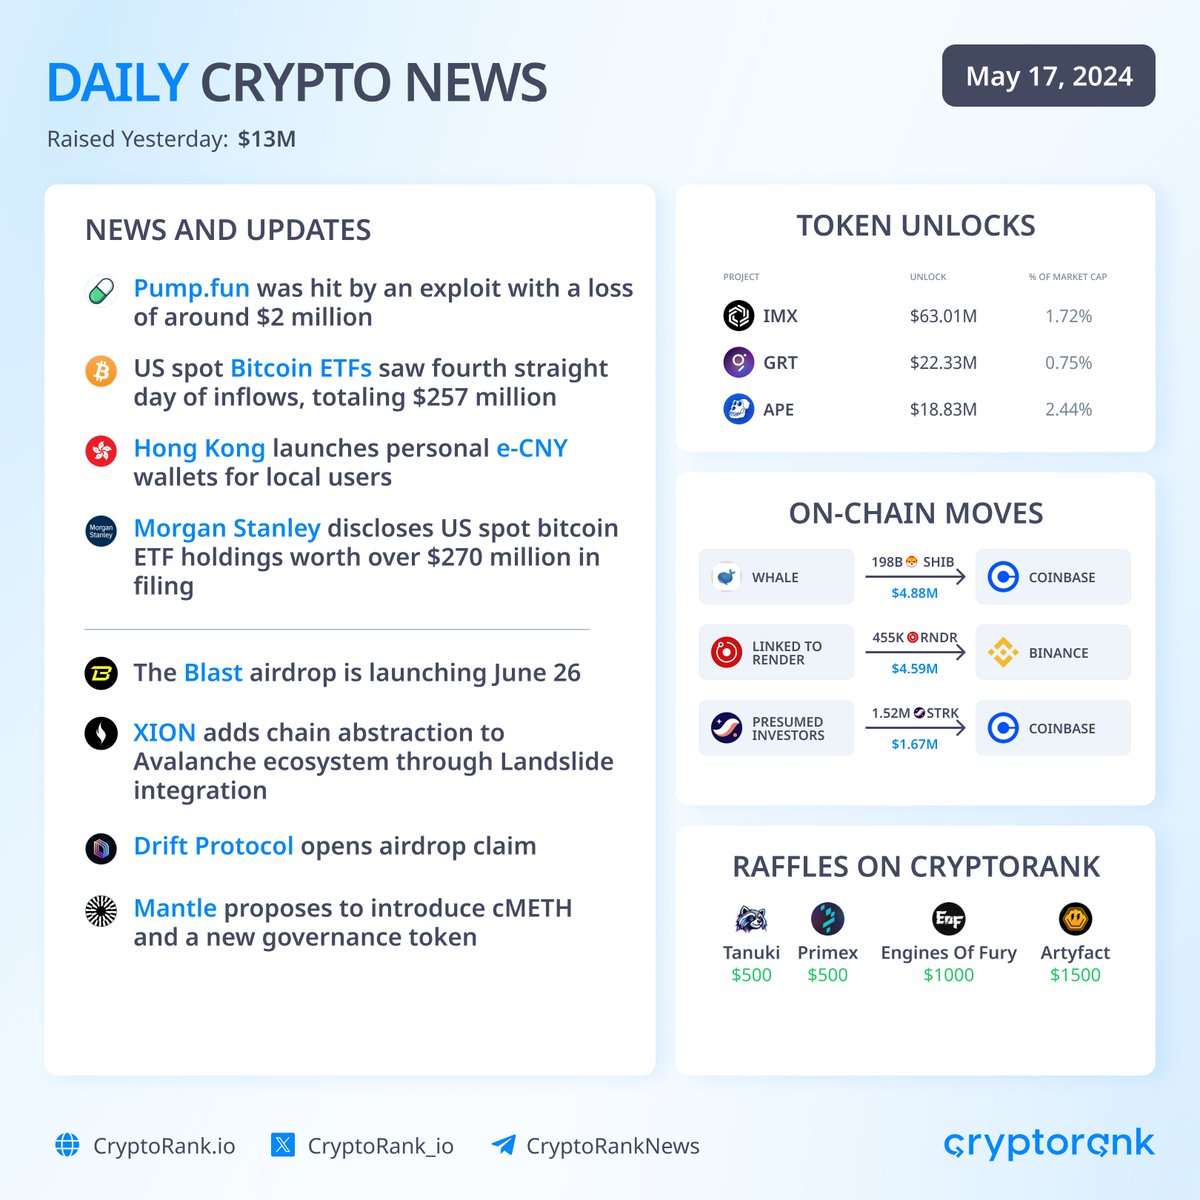 Daily Crypto News 📣 👉 News: — Pump fun was hit by an exploit with a loss of around $2 million — US spot #BitcoinETFs saw fourth straight day of inflows, totaling $257 million — Hong Kong launches personal e-CNY wallets for local users — Morgan Stanley discloses US spot